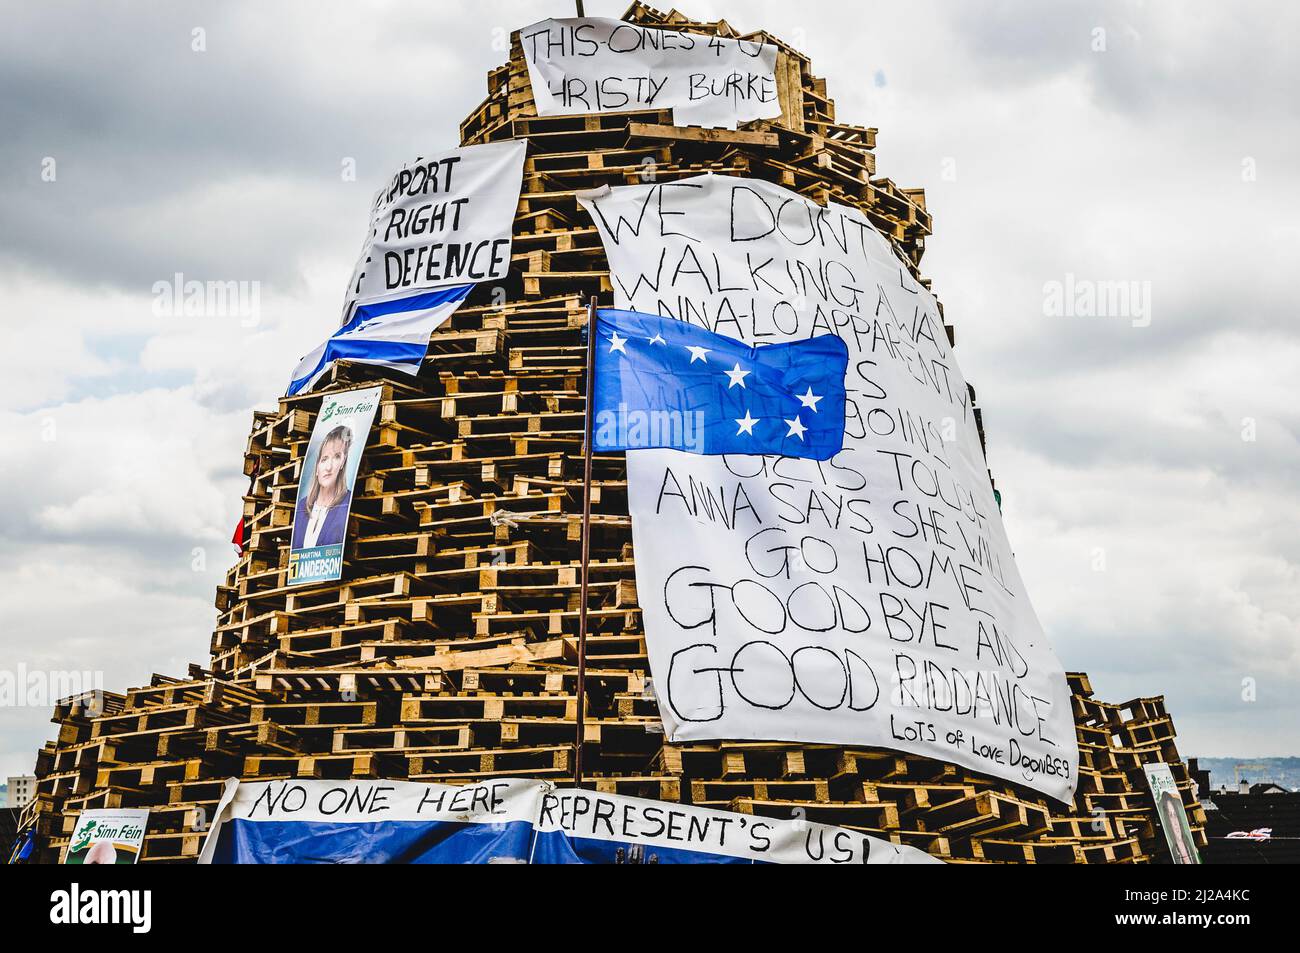 Newtownabbey, Northern Ireland. 11 July 2014 - Bonfires are prepared for burning for 11th July celebrations, many being adorned with election posters from hated politicians, or large banners with political messages. Stock Photo